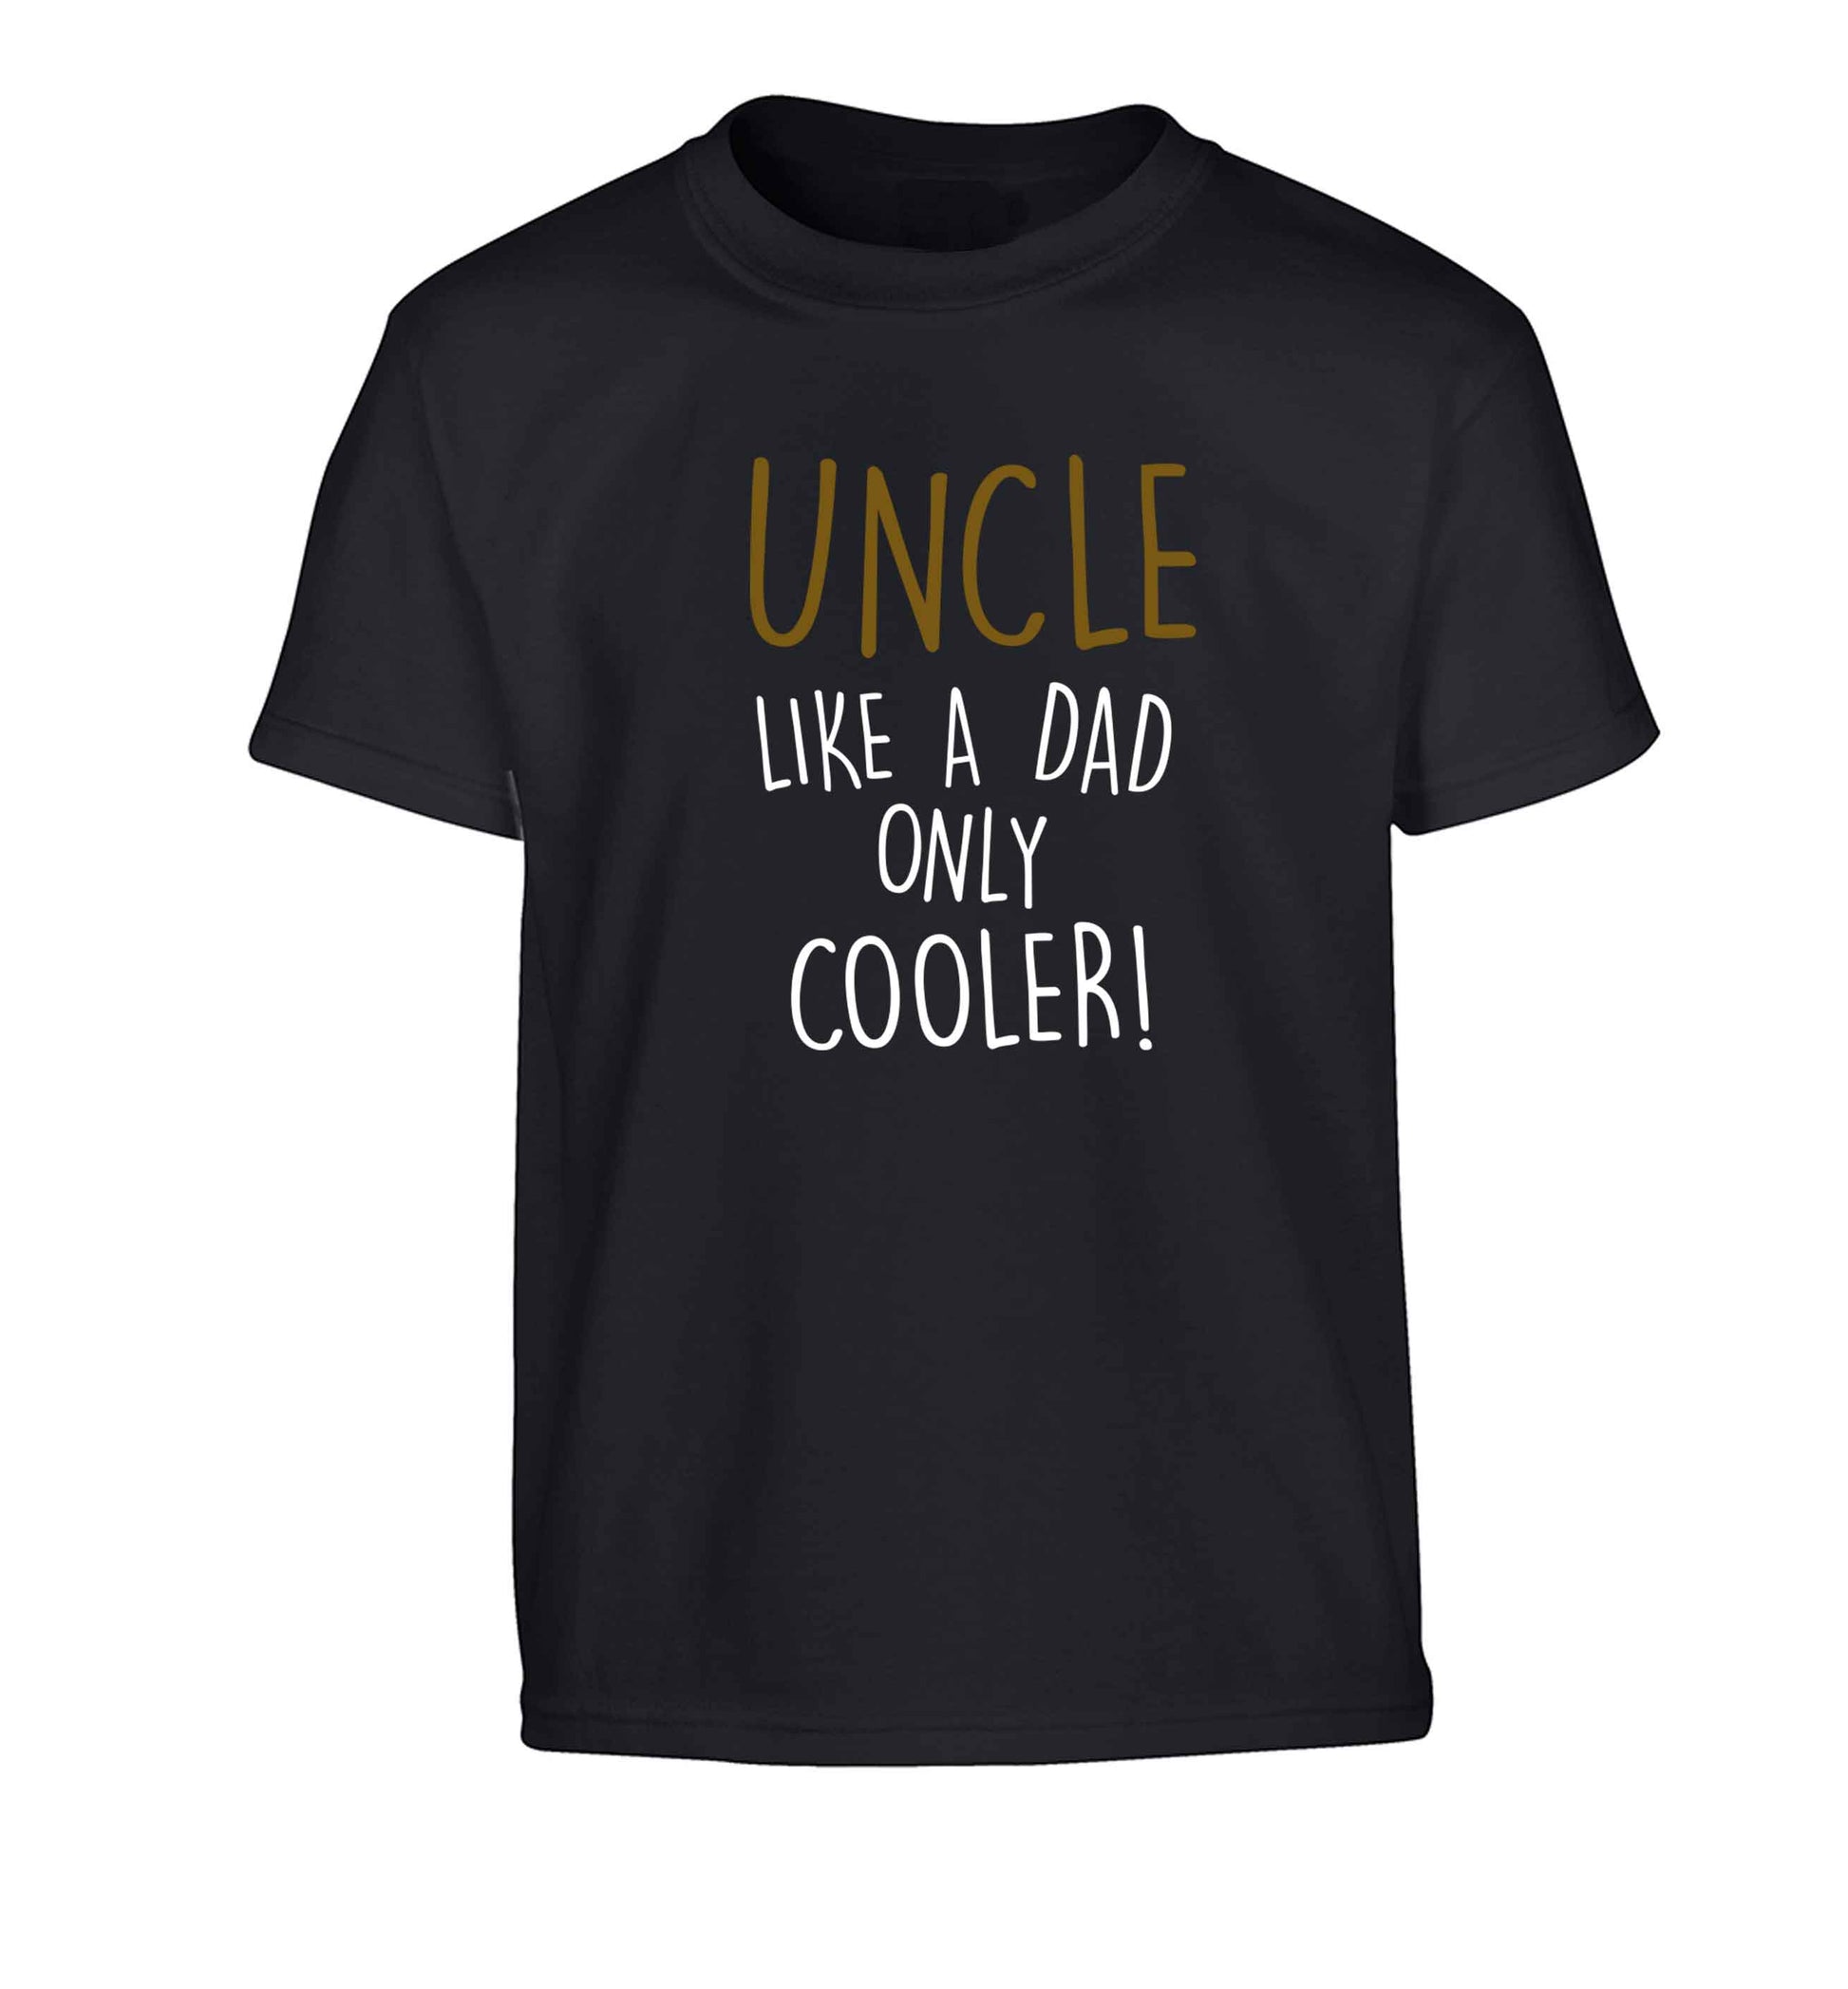 Uncle like a dad only cooler Children's black Tshirt 12-13 Years